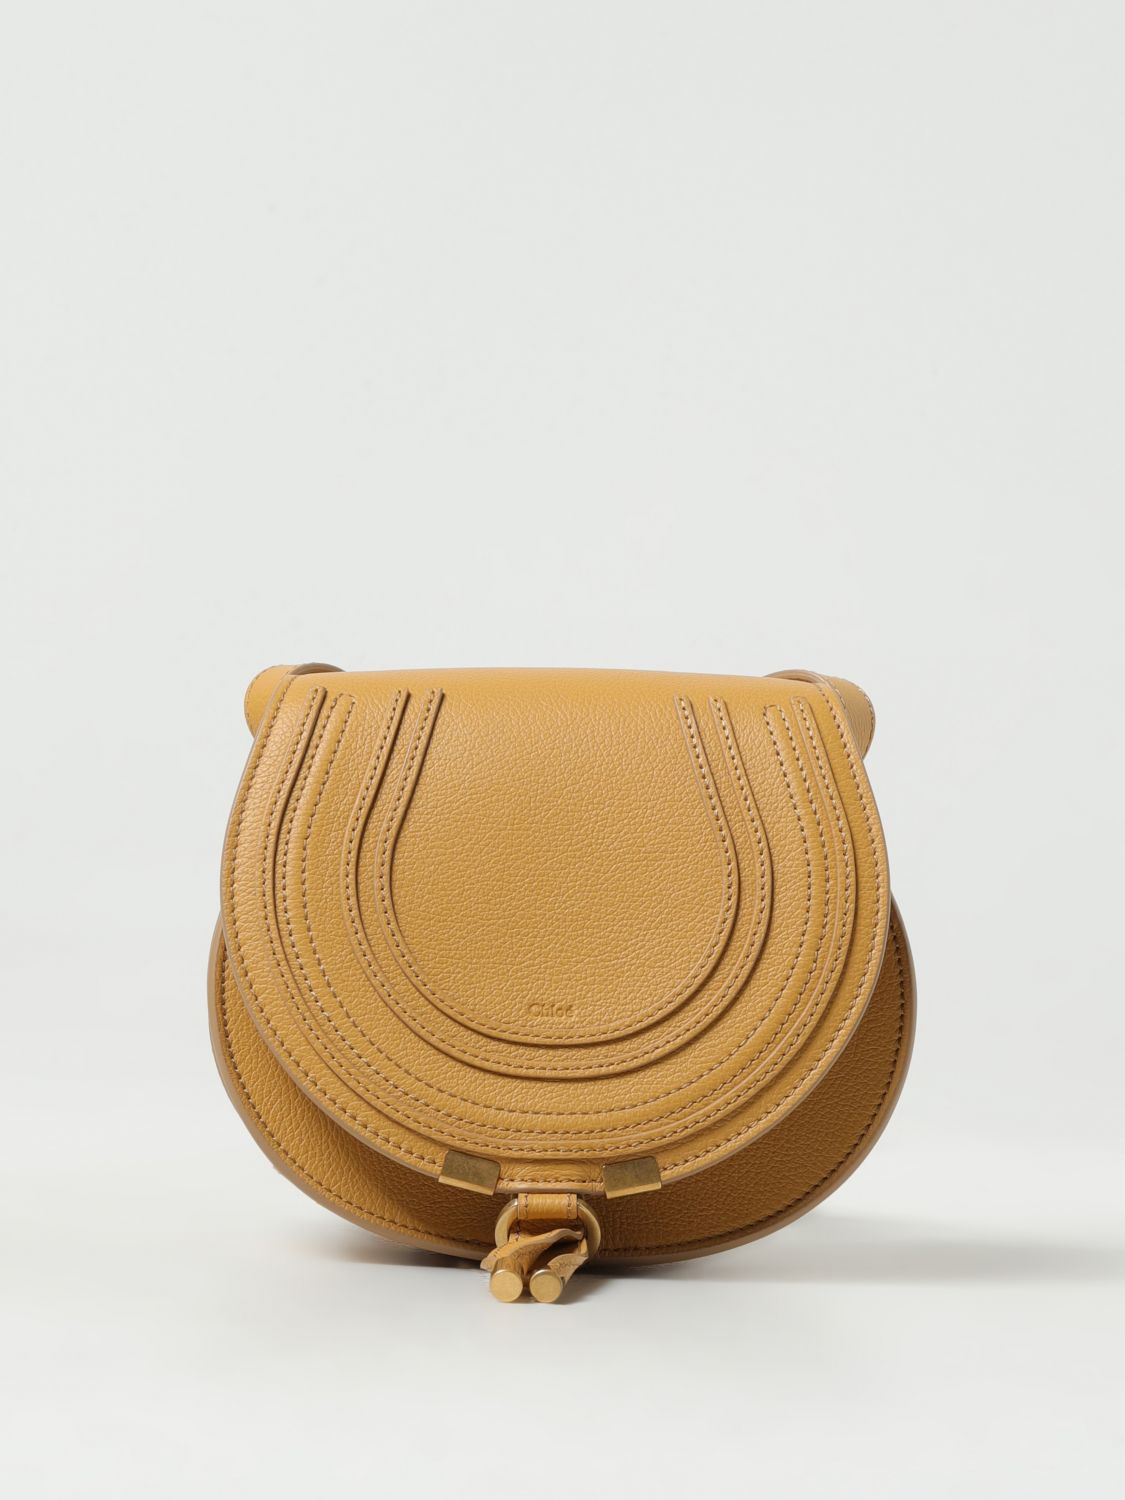 Chloé Marcie  Bag In Grained Leather In Honey